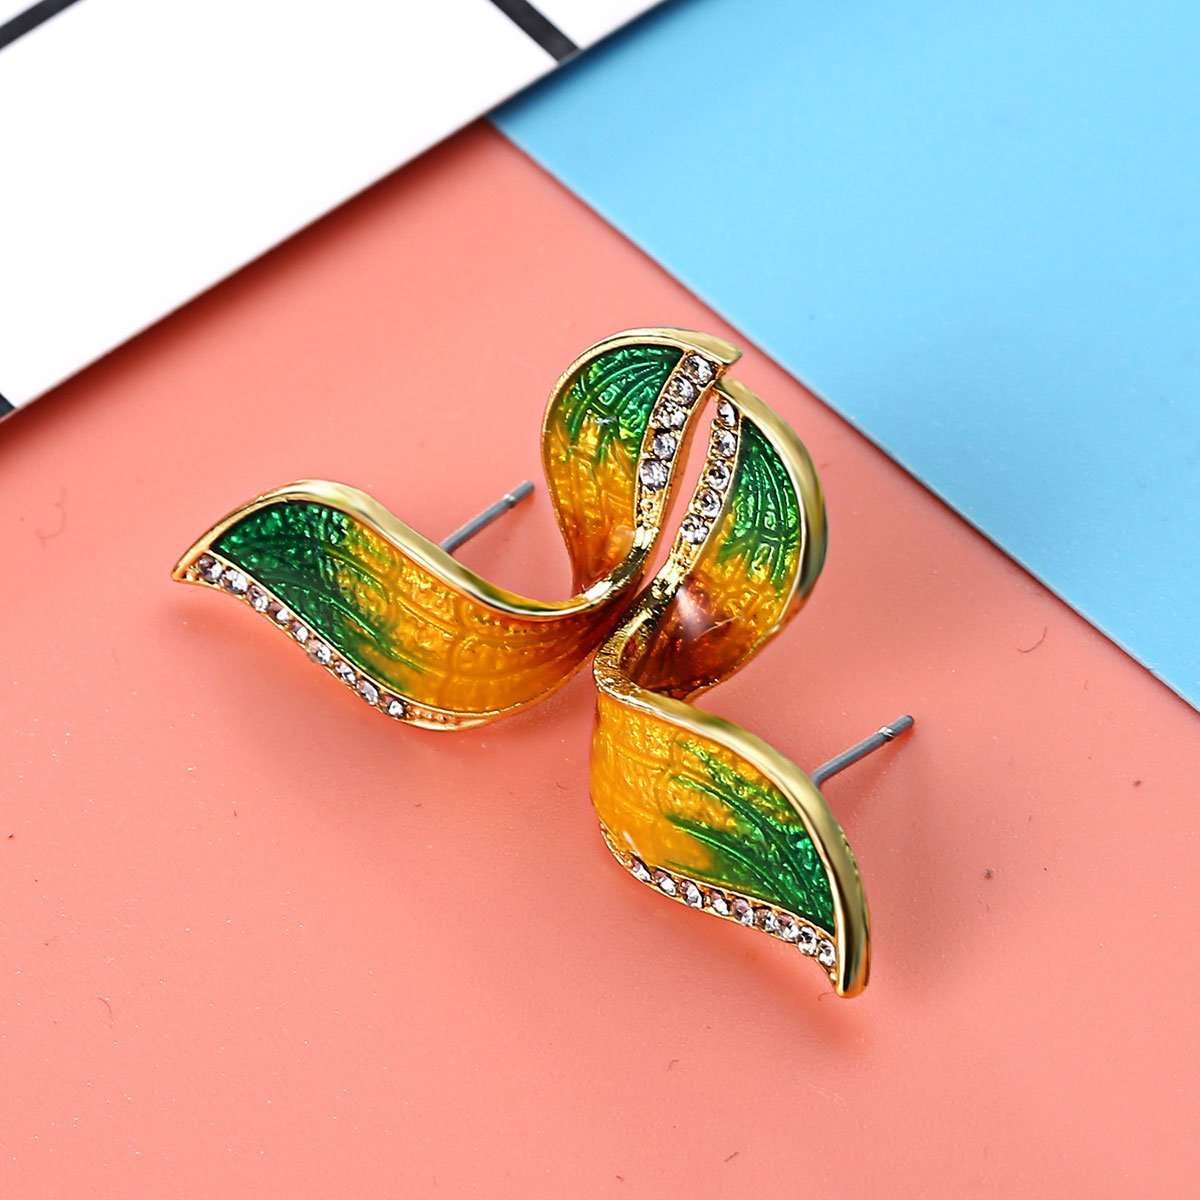 Fall Colored Butterfly Wing Earrings with Rhinestone - My Custom Tee Party